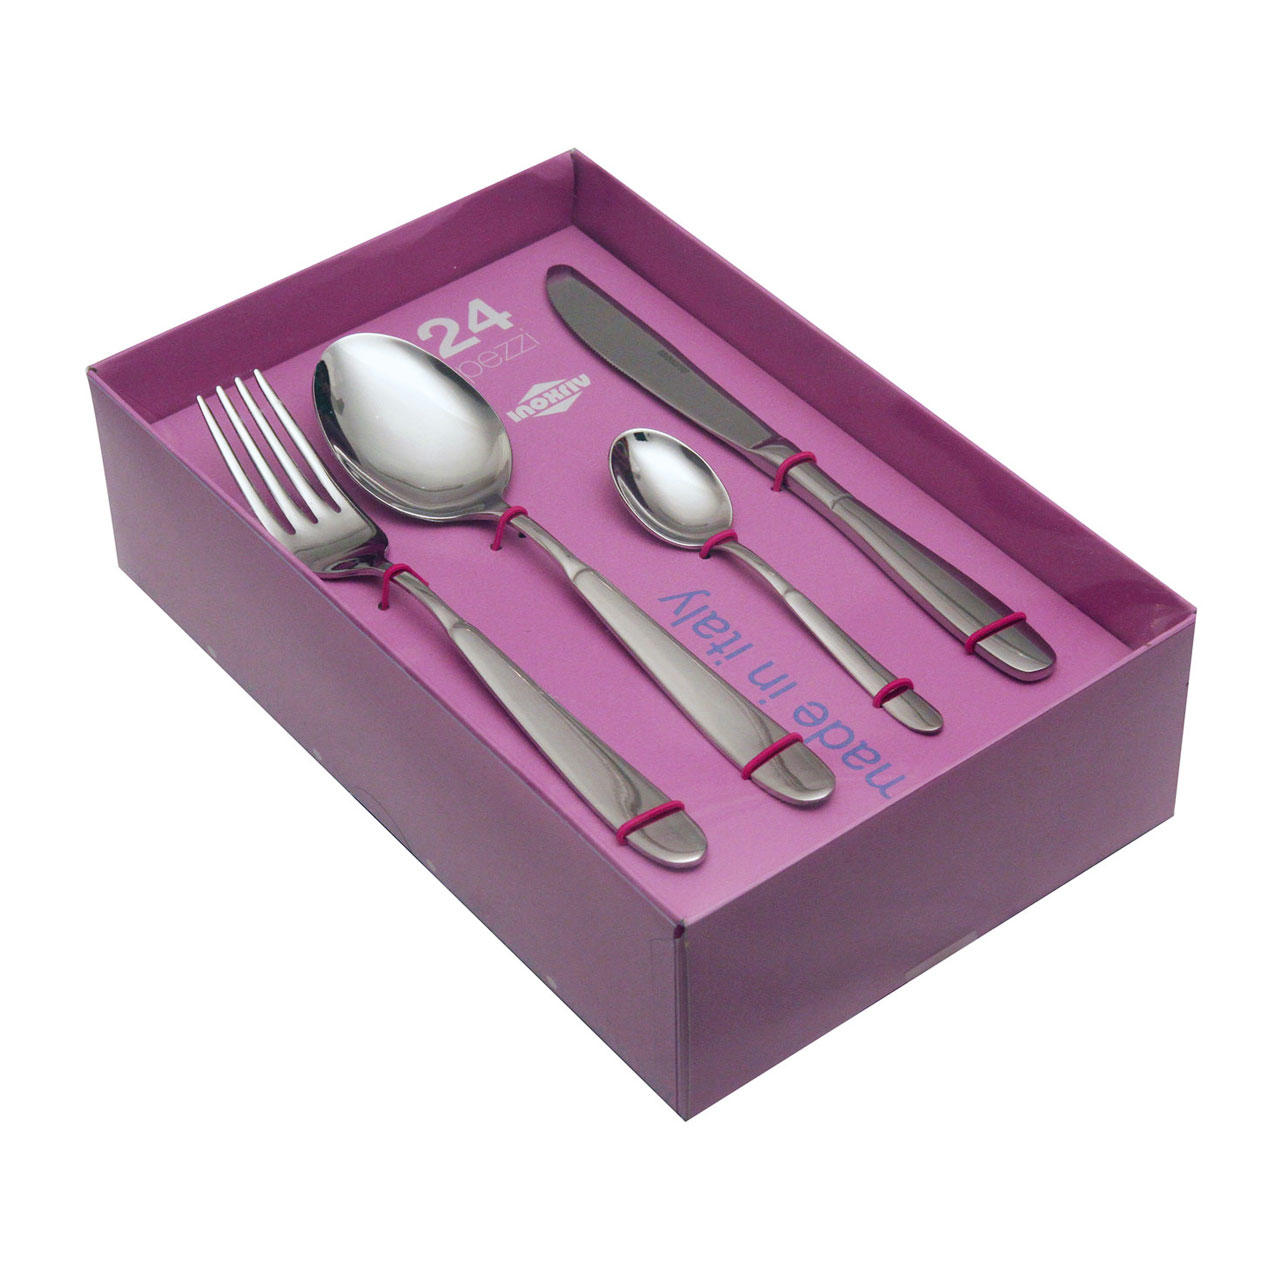 614424 24 pcs. cutlery set 18/10 stainless steel Nature Box 